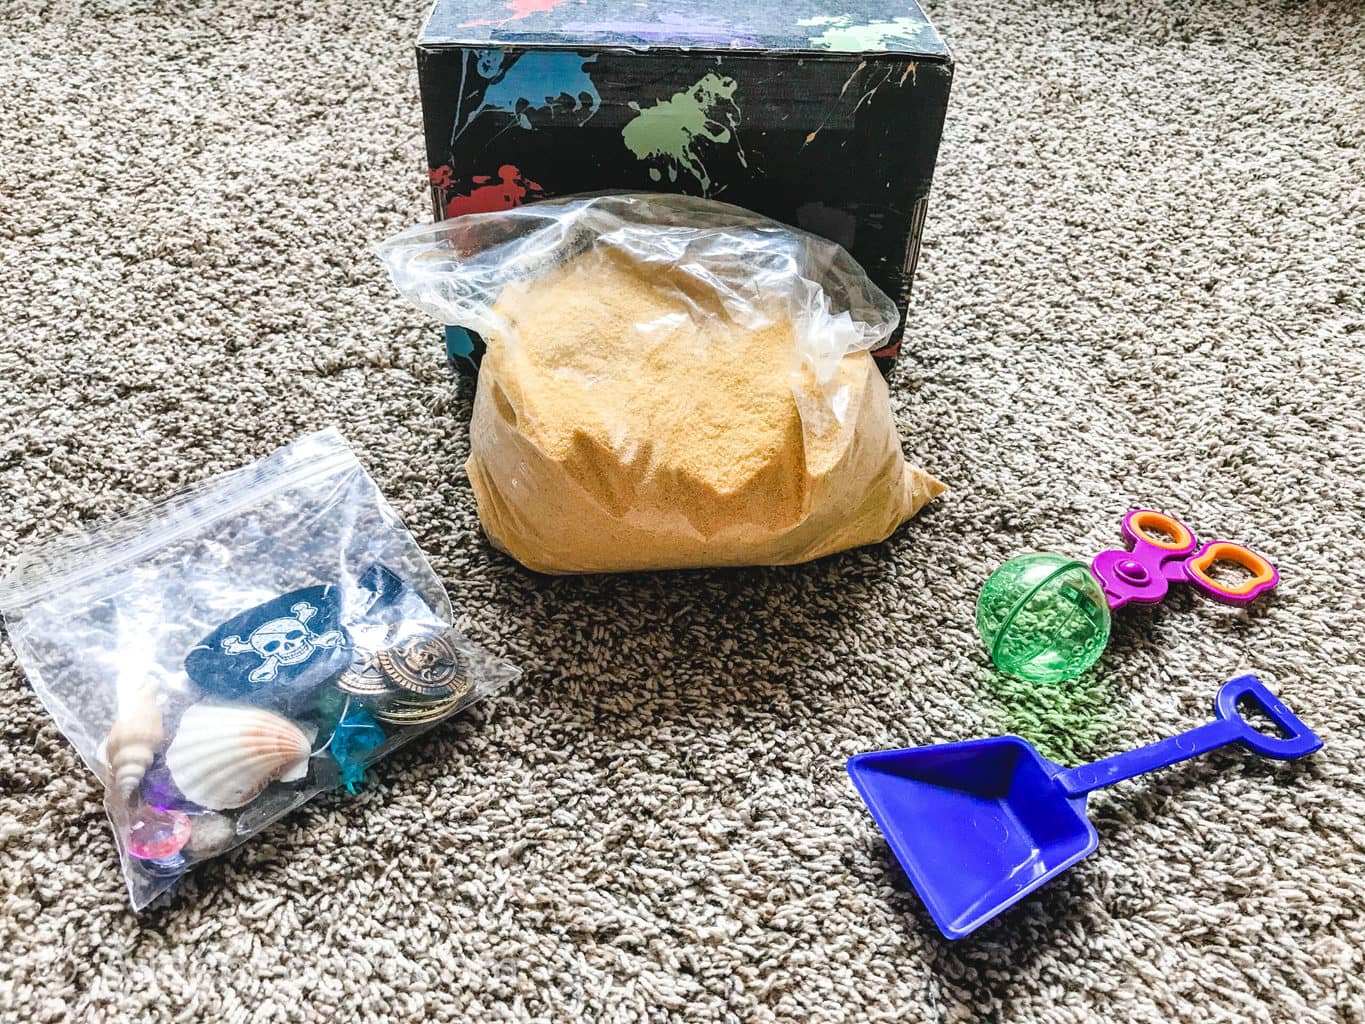 The contents of the messy play kids box on grey carpet.